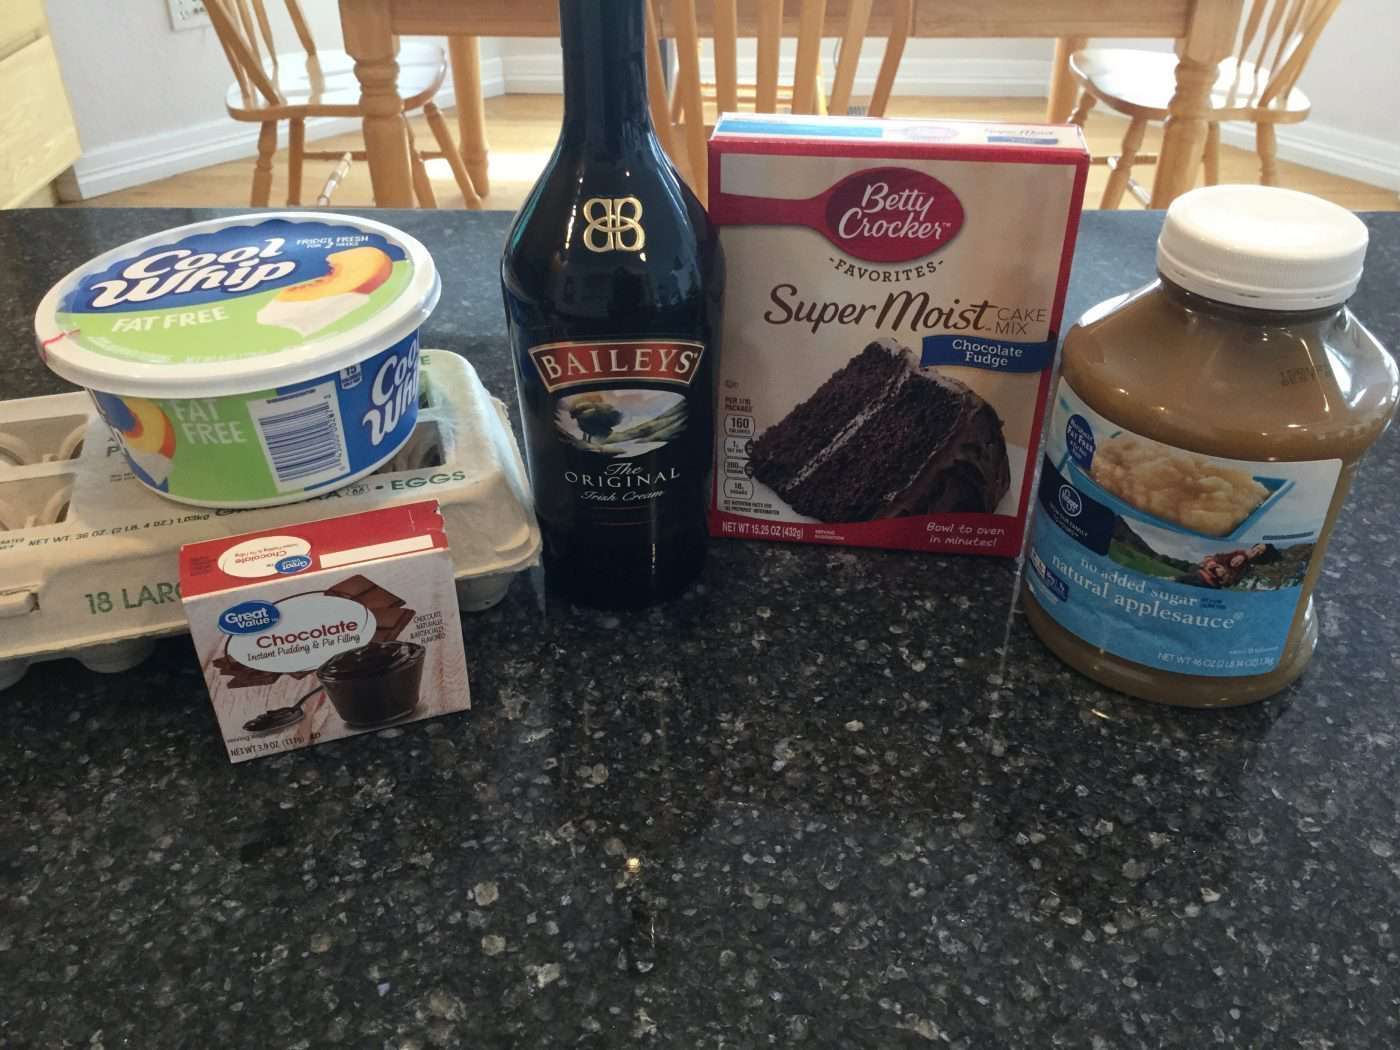 For this recipe you'll need: A box of chocolate cake mix of your choice, the ingredients to make that cake, instant chocolate pudding (4 serving size), Bailey's (optional)/Irish Coffee Creamer, and whip cream topping.